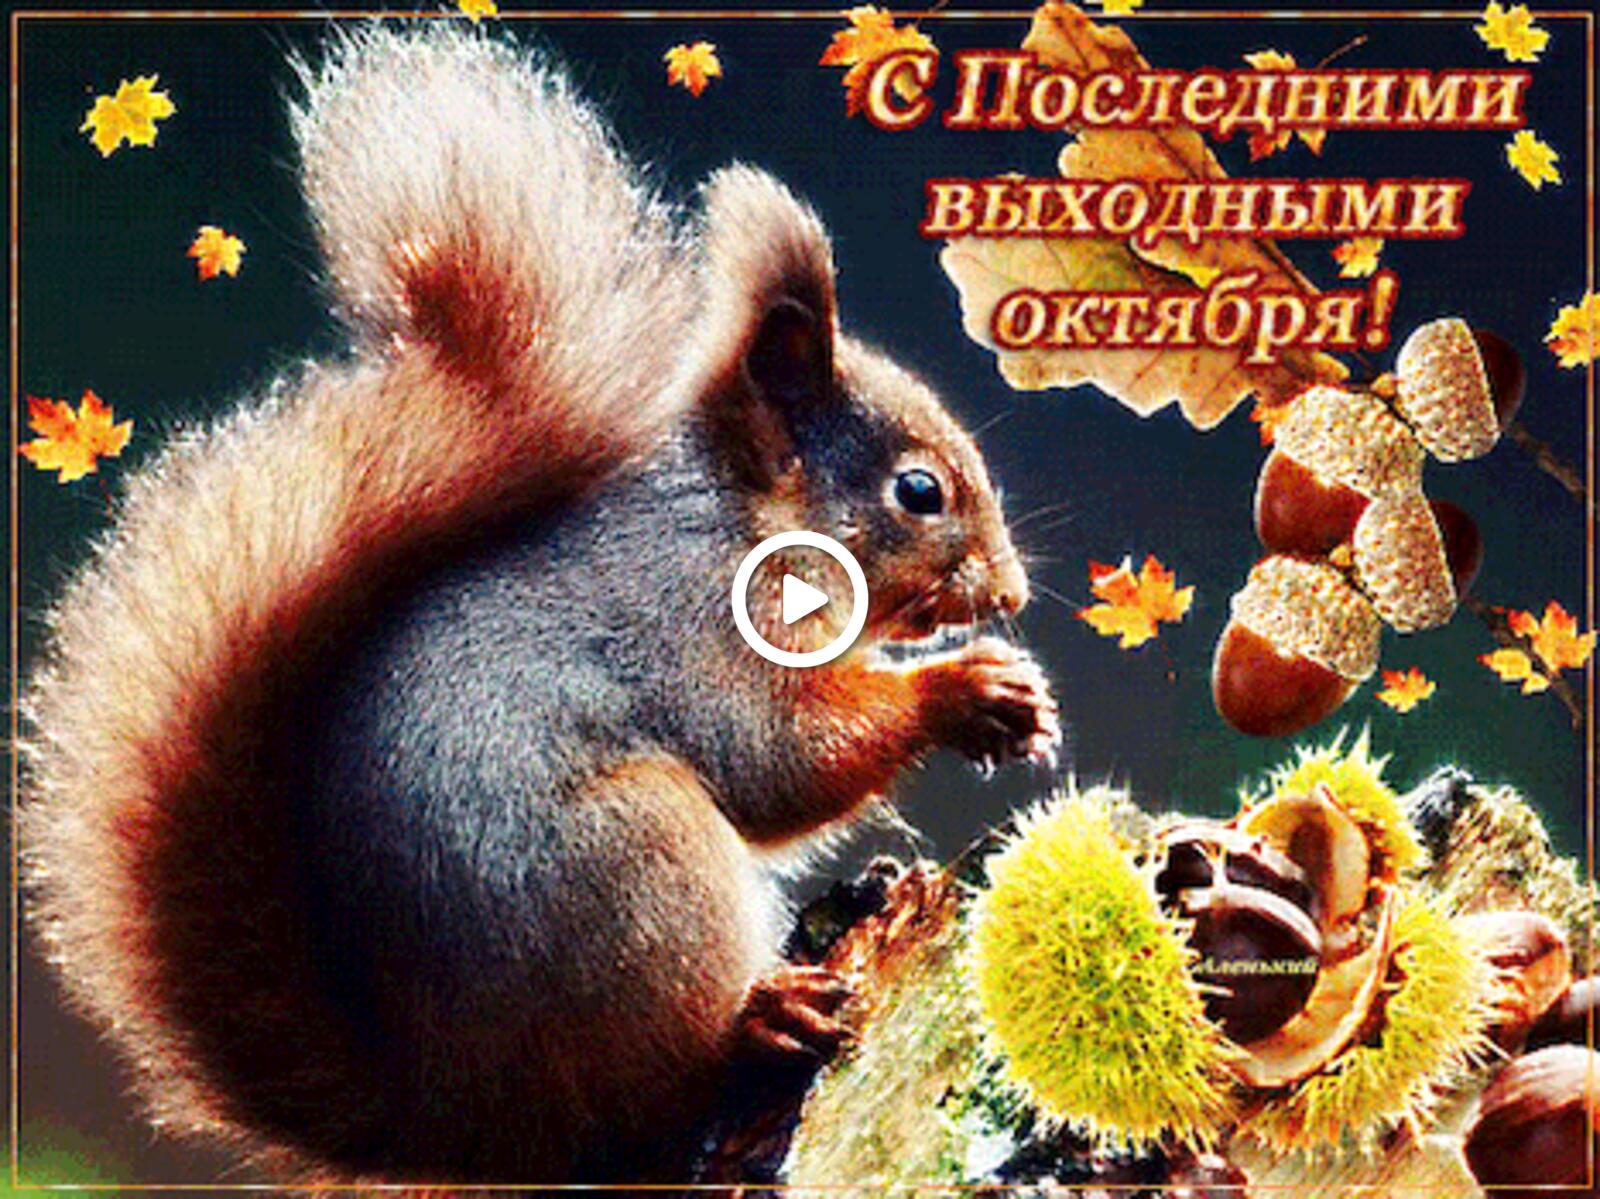 A postcard on the subject of squirrel happy last day of october last day of october for free